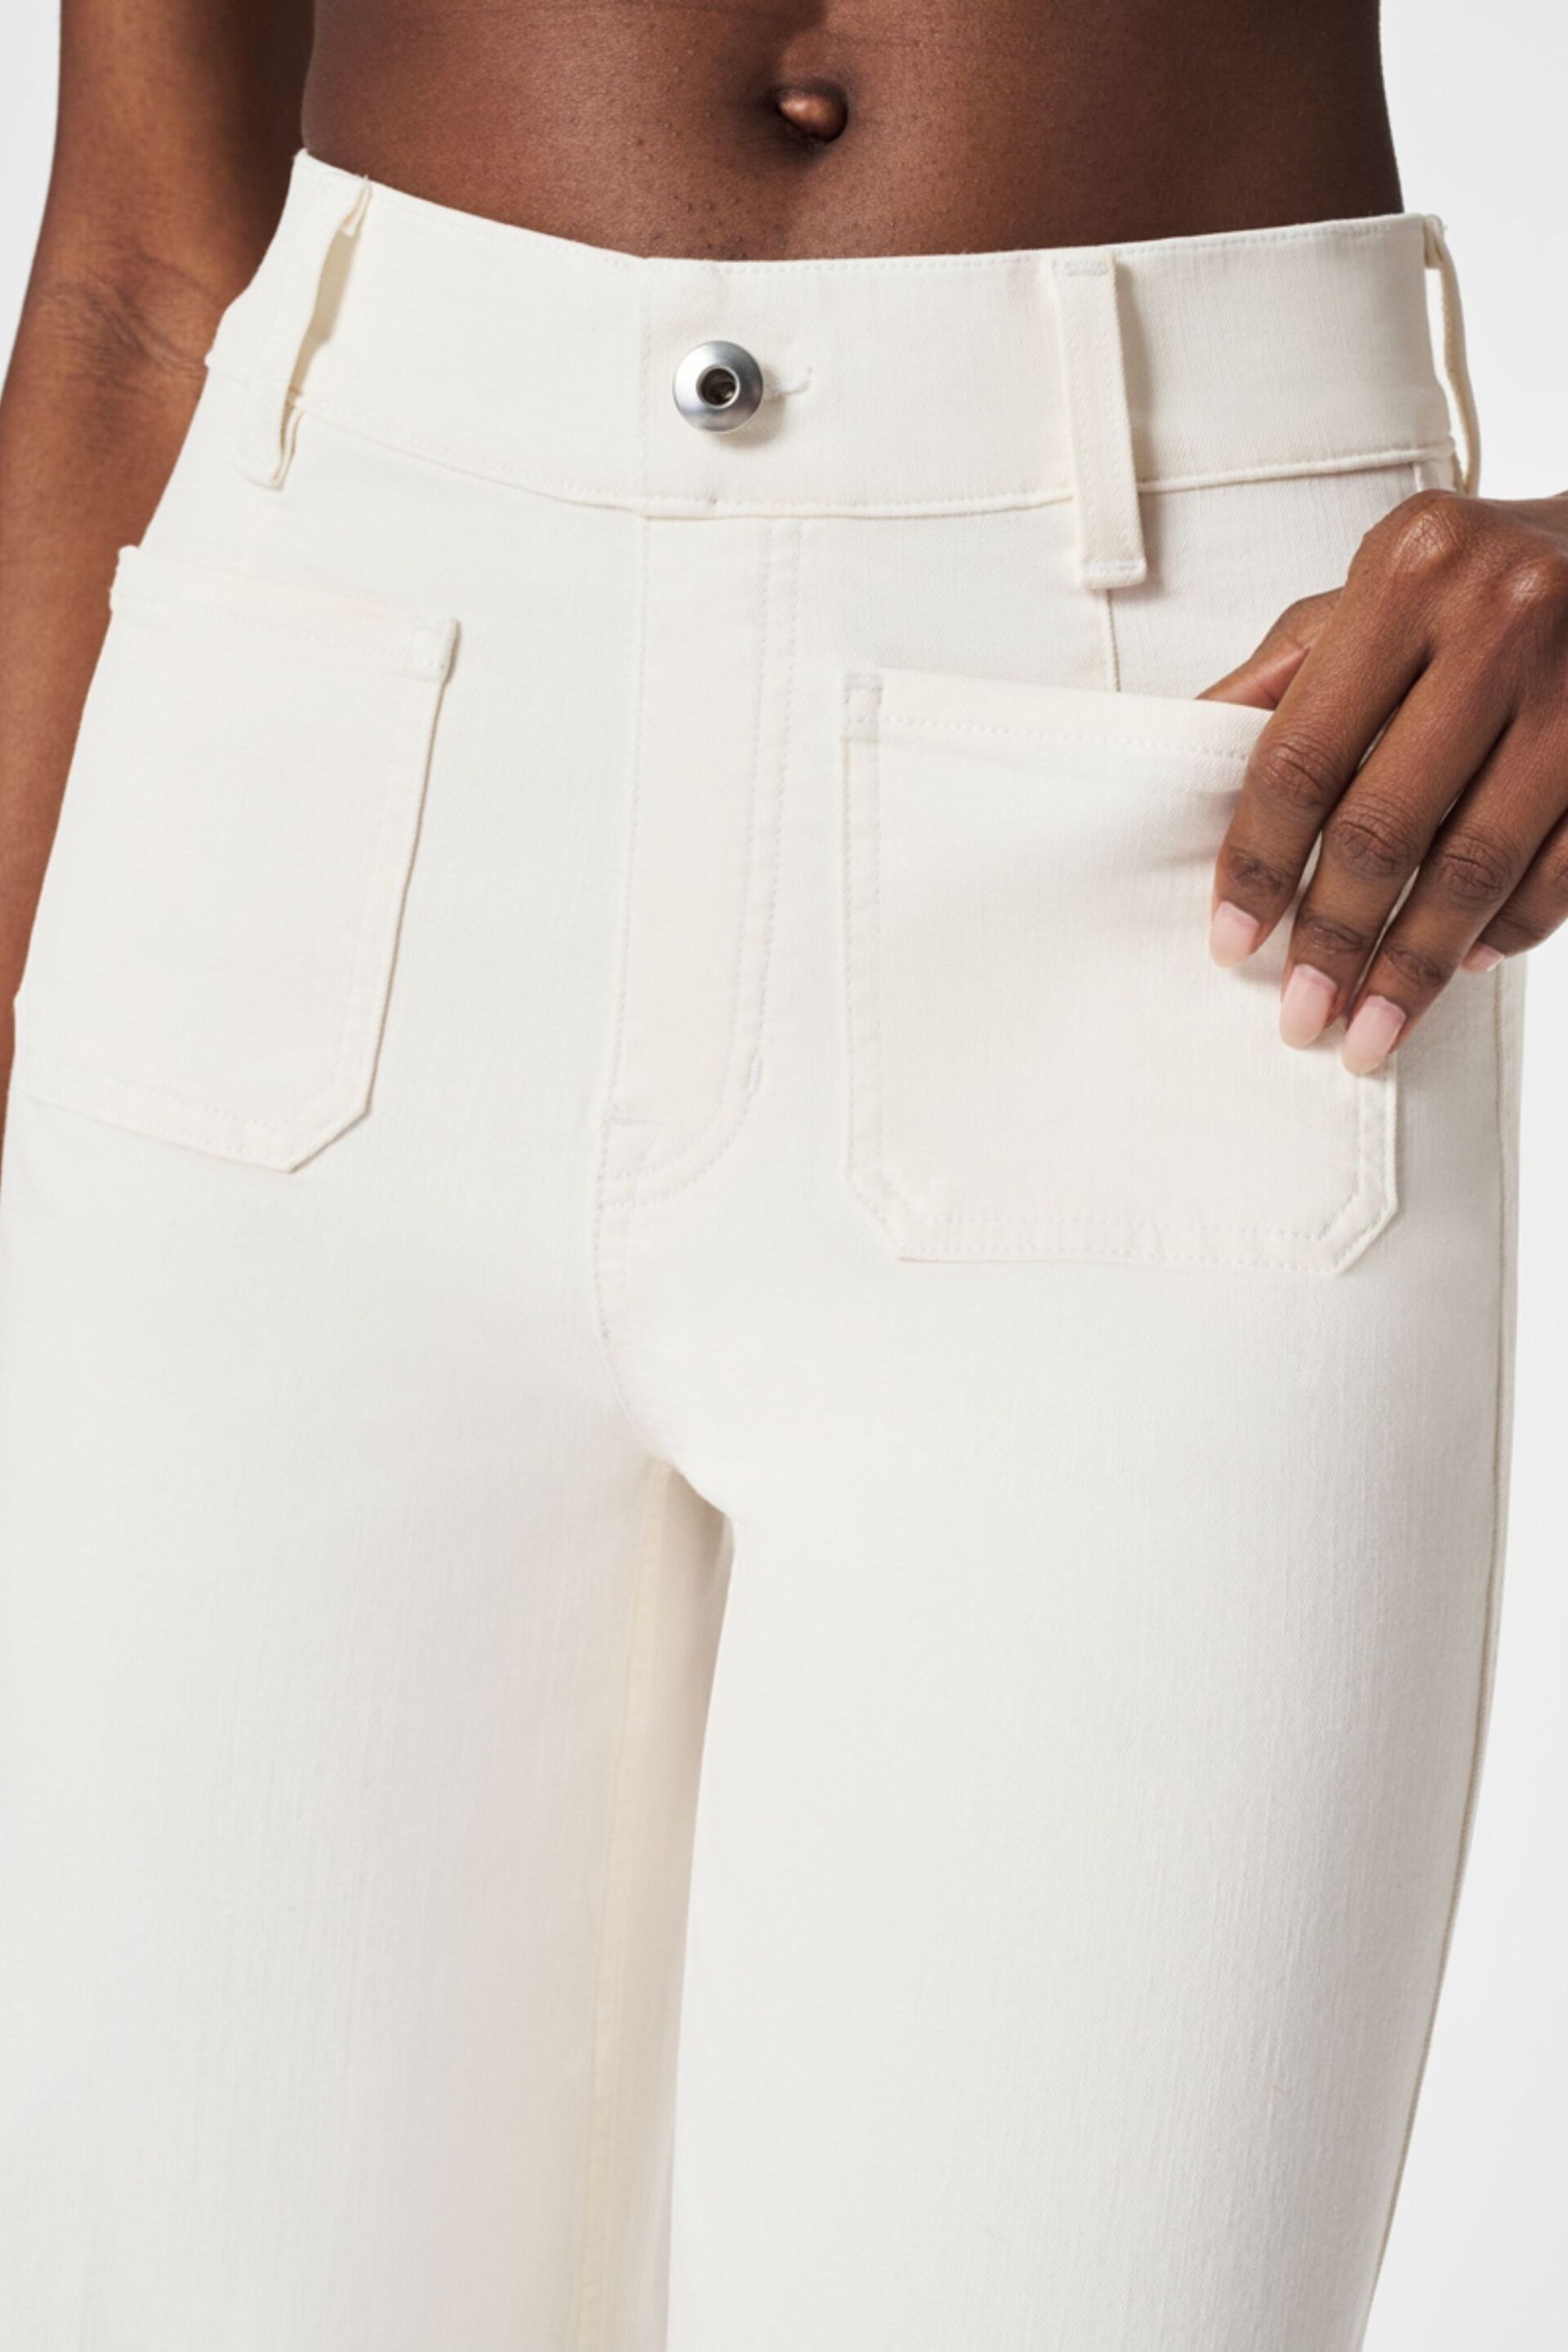 SPANX Cropped Raw Hem Wide Leg White Jeans - Image 4 of 5